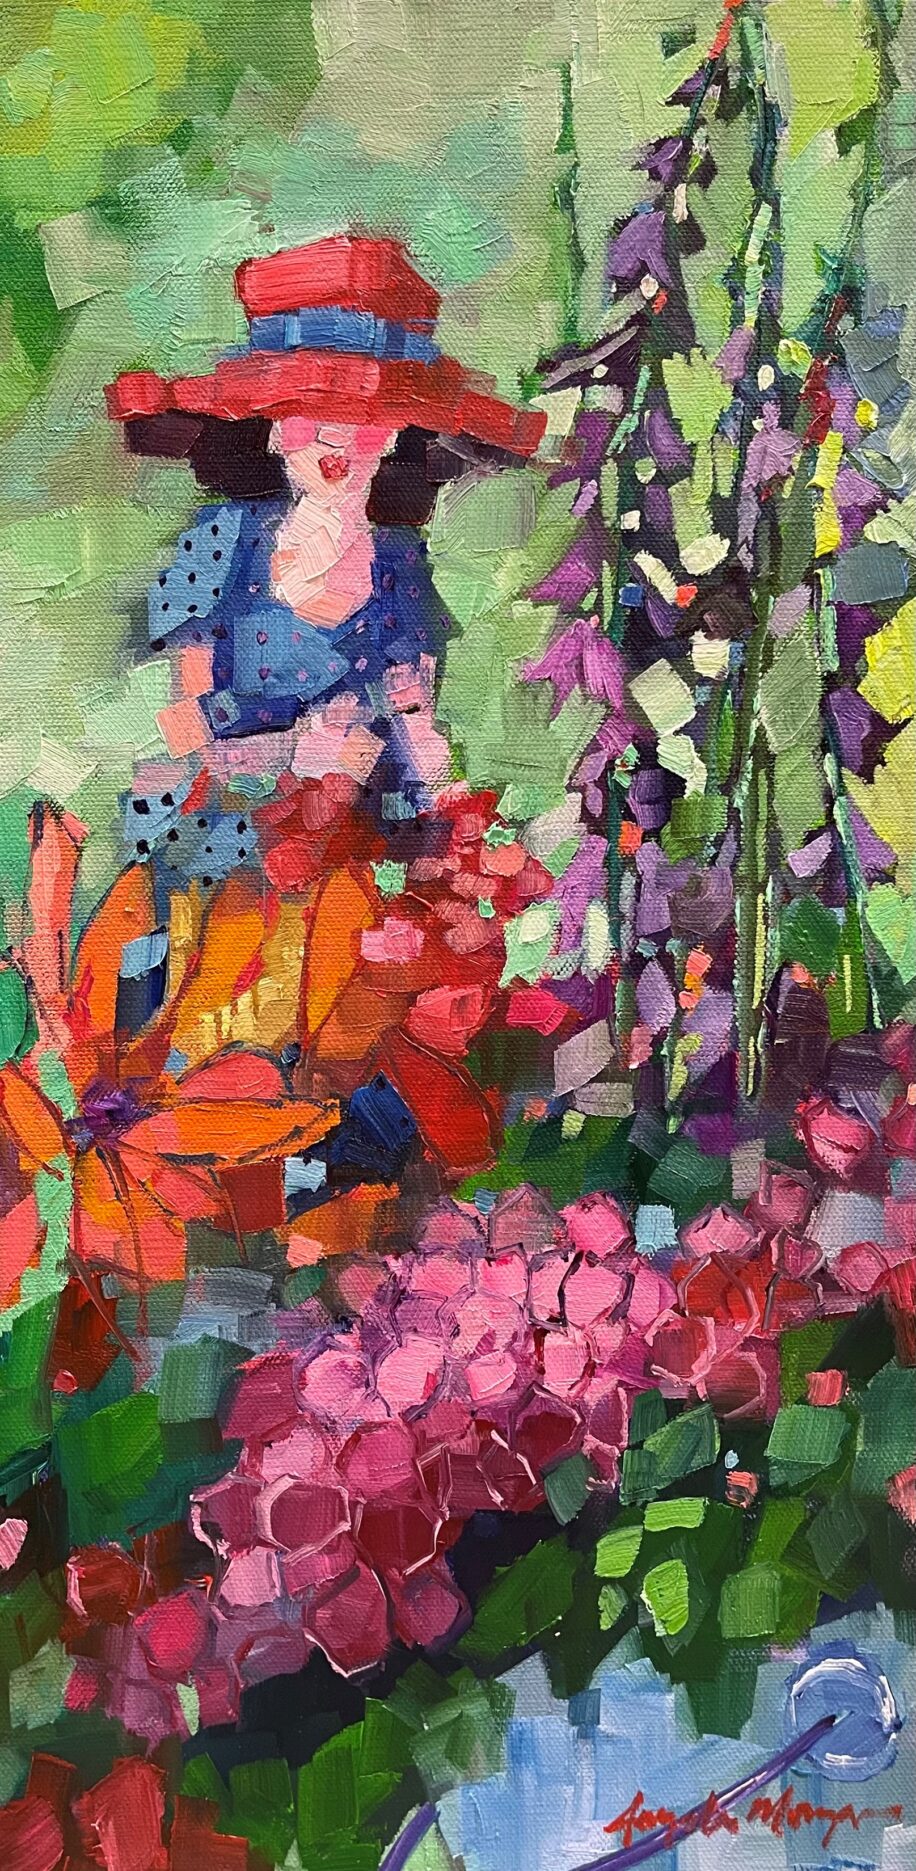 Study: Garden Tour by Angela Morgan at The Avenue Gallery, a contemporary fine art gallery in Victoria, BC, Canada.